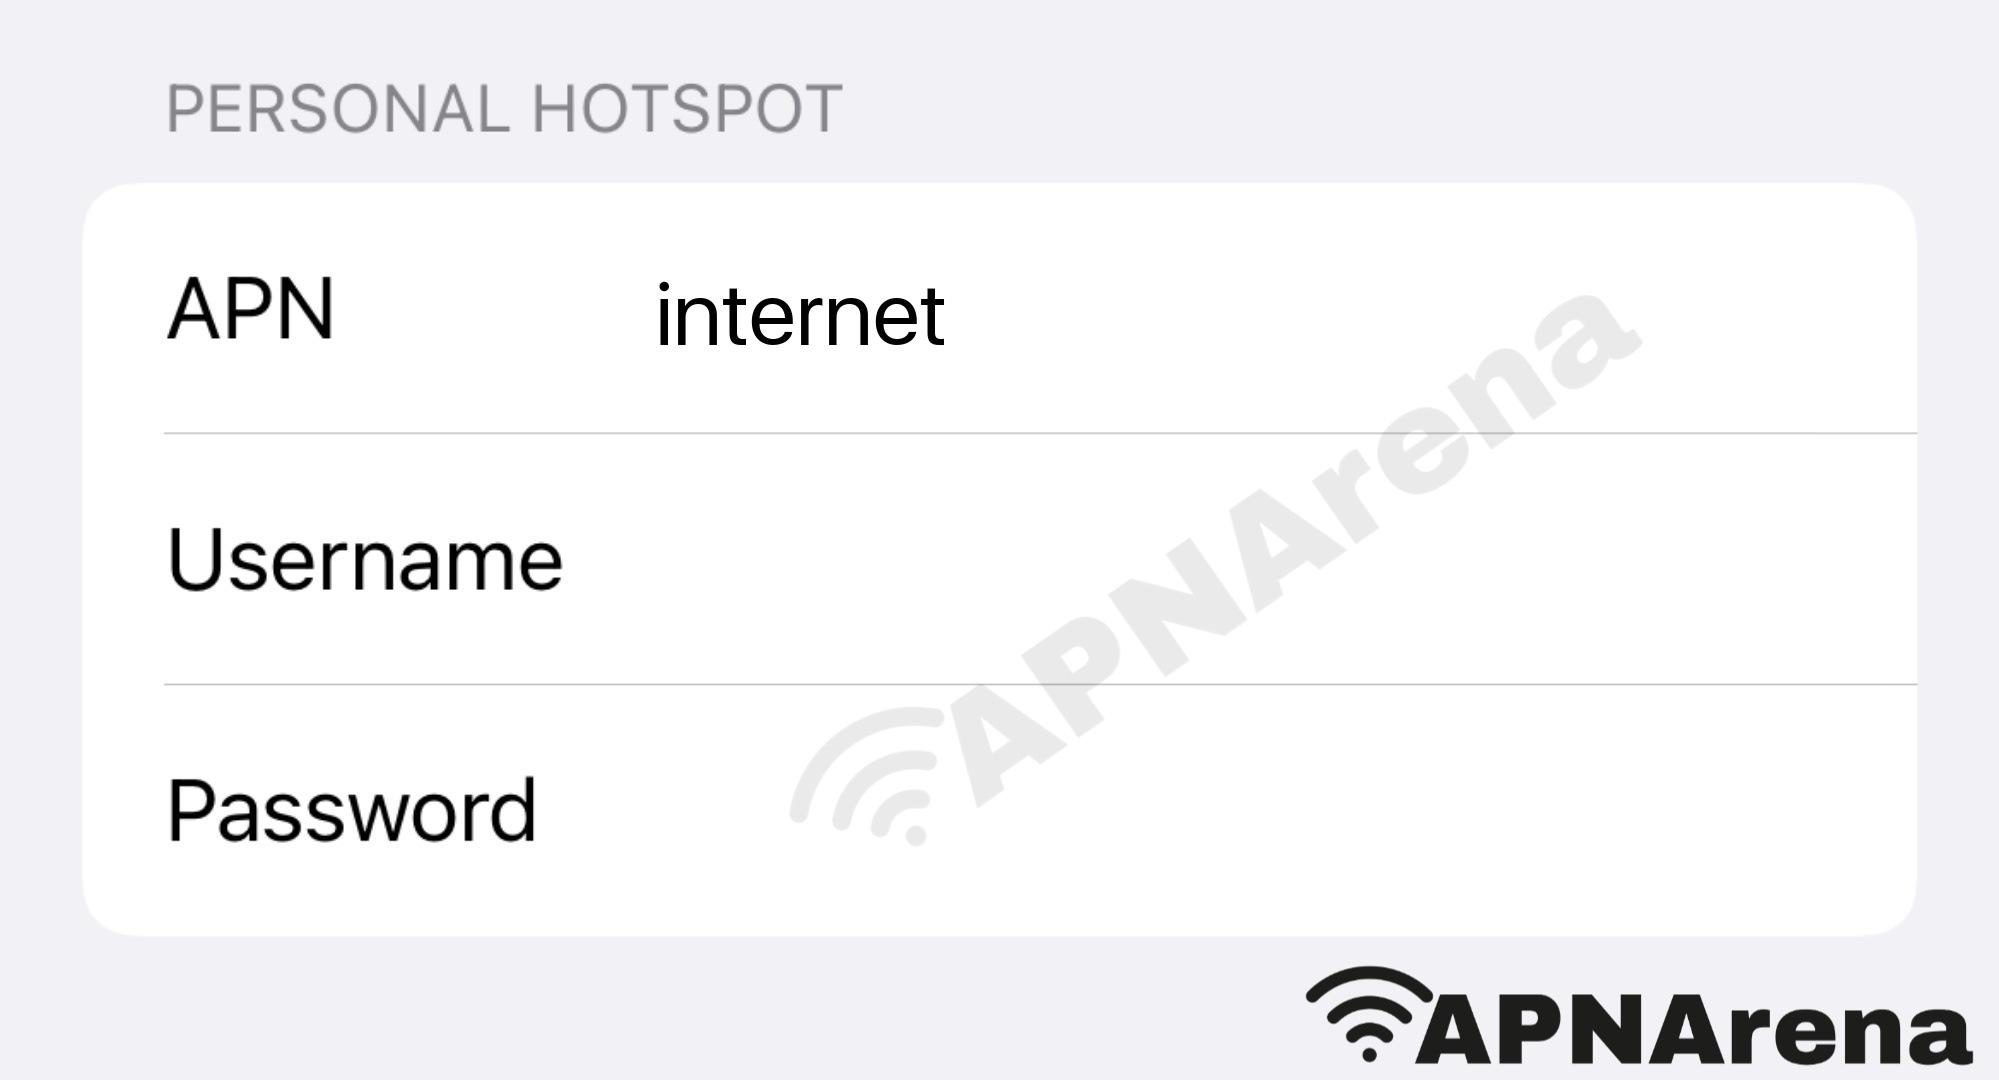 Pine Cellular Personal Hotspot Settings for iPhone